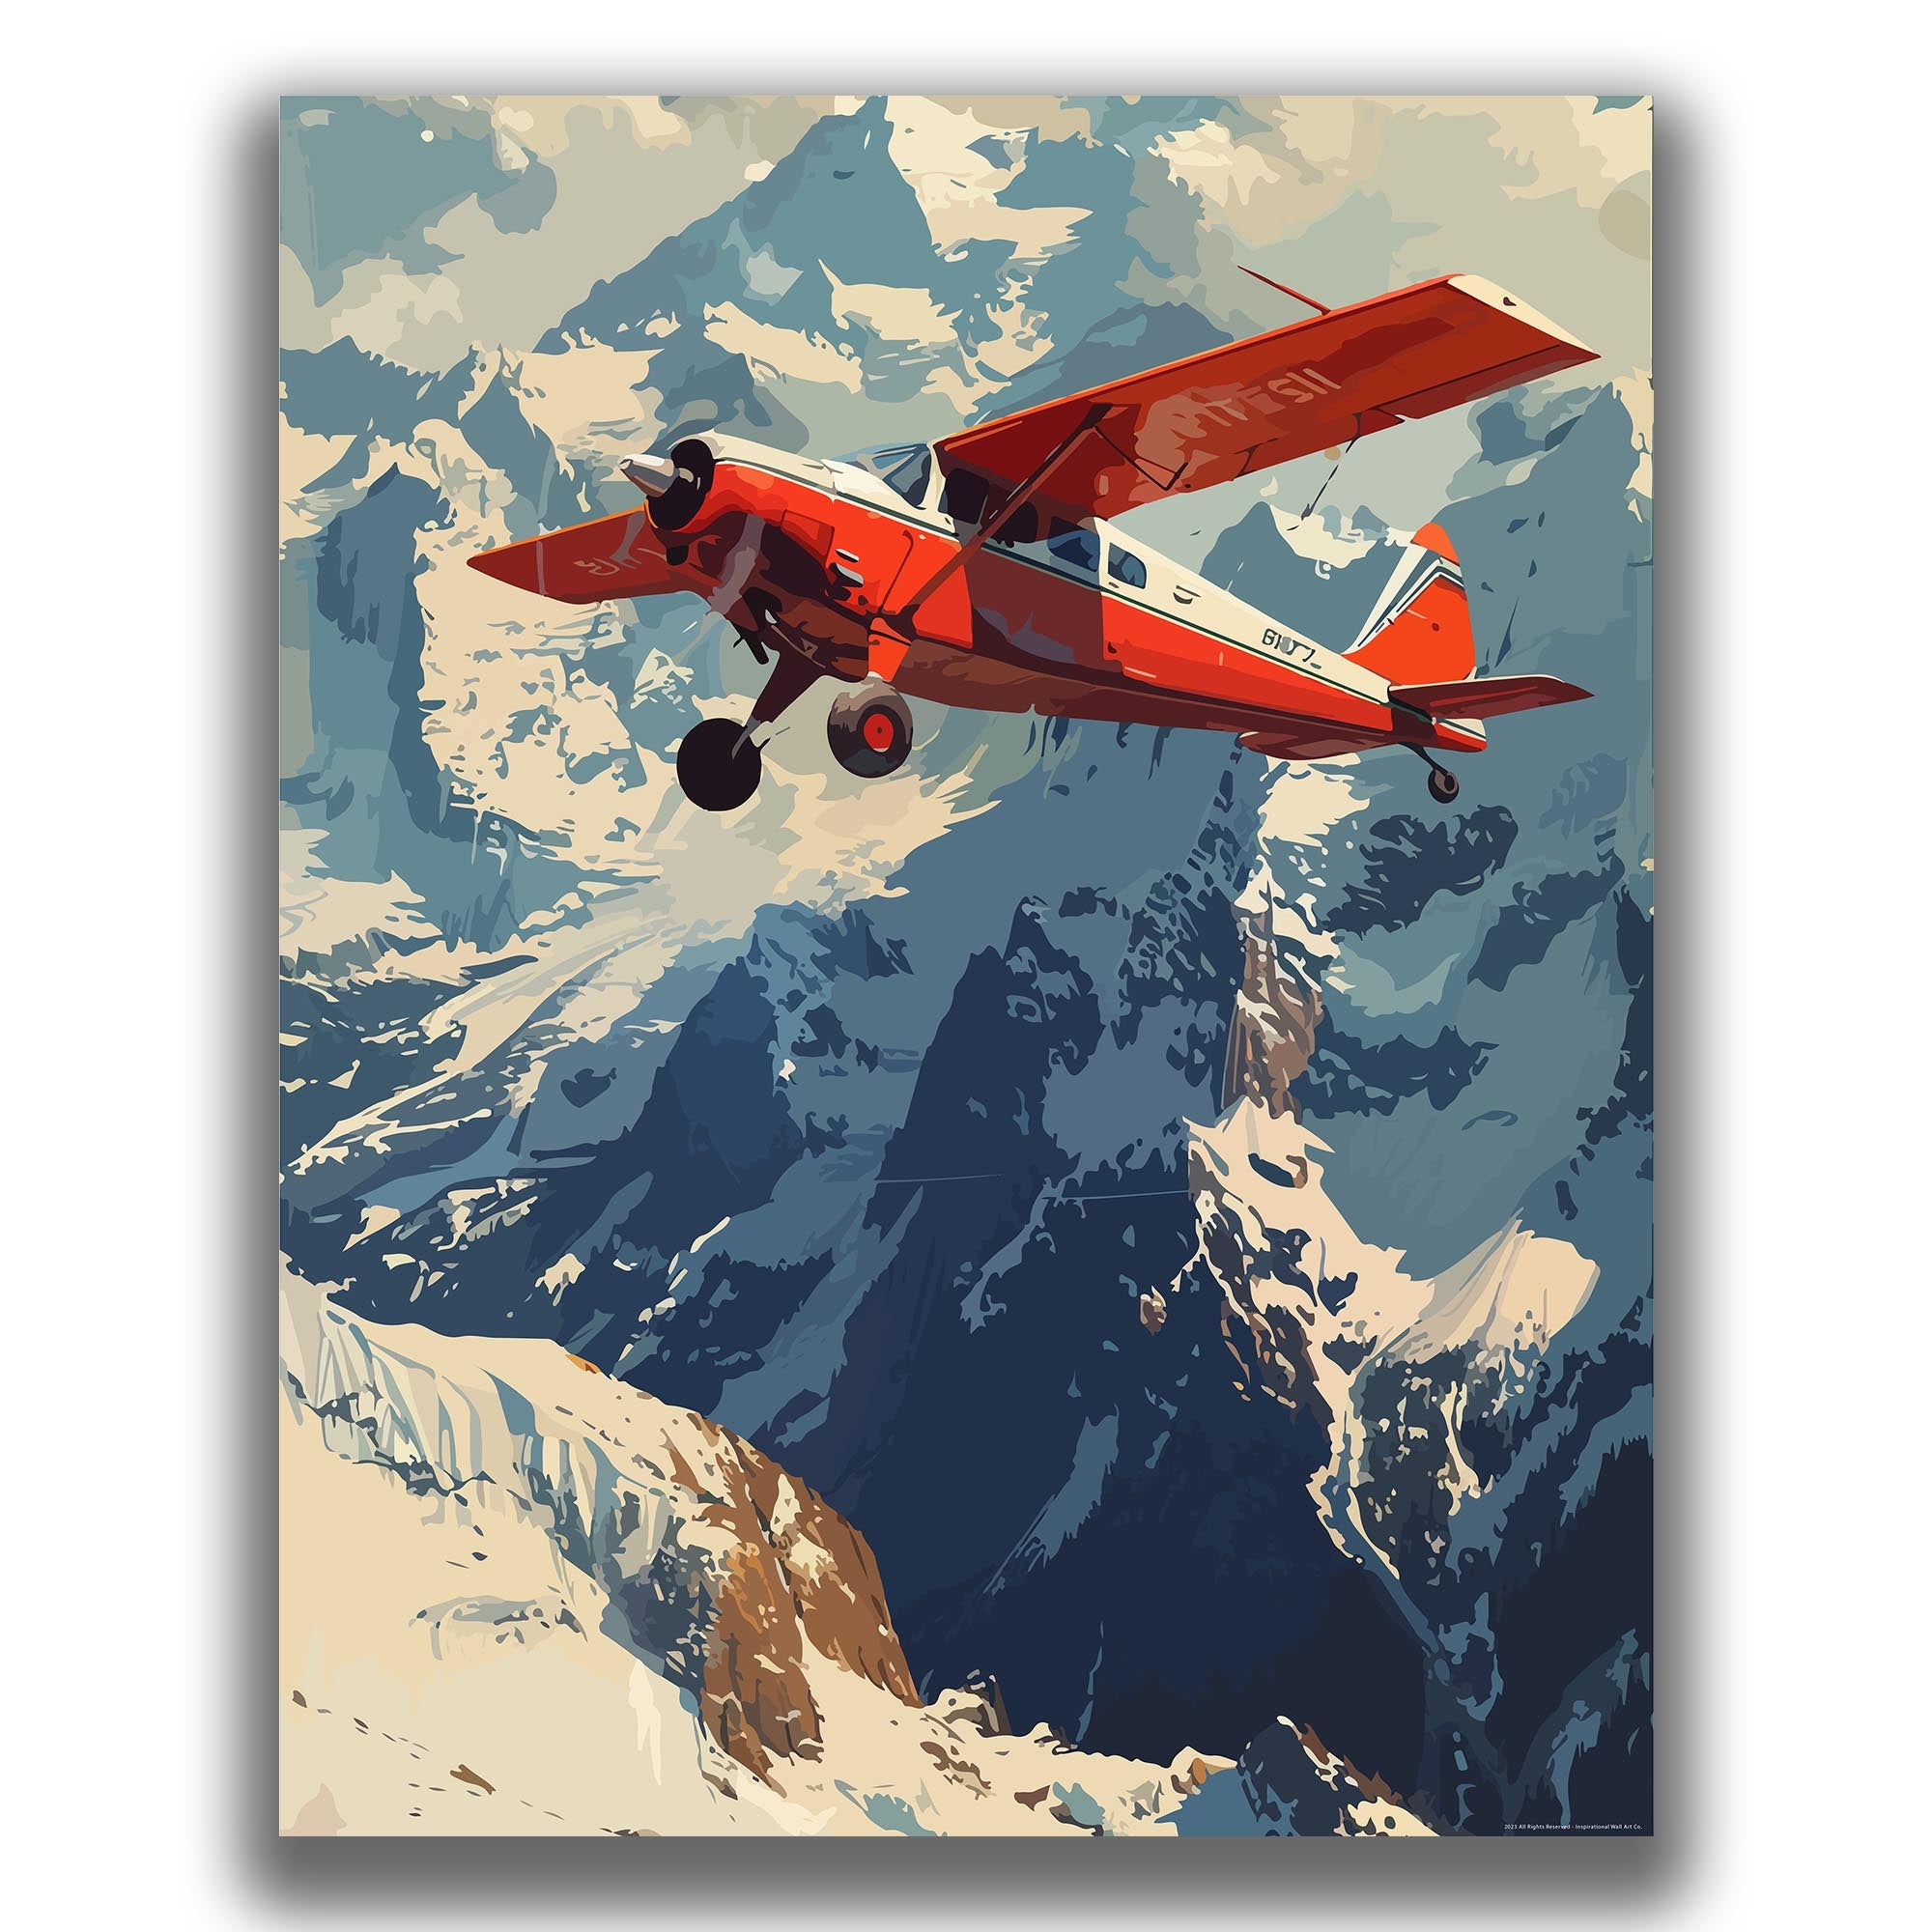 Formidable - Airplane Poster